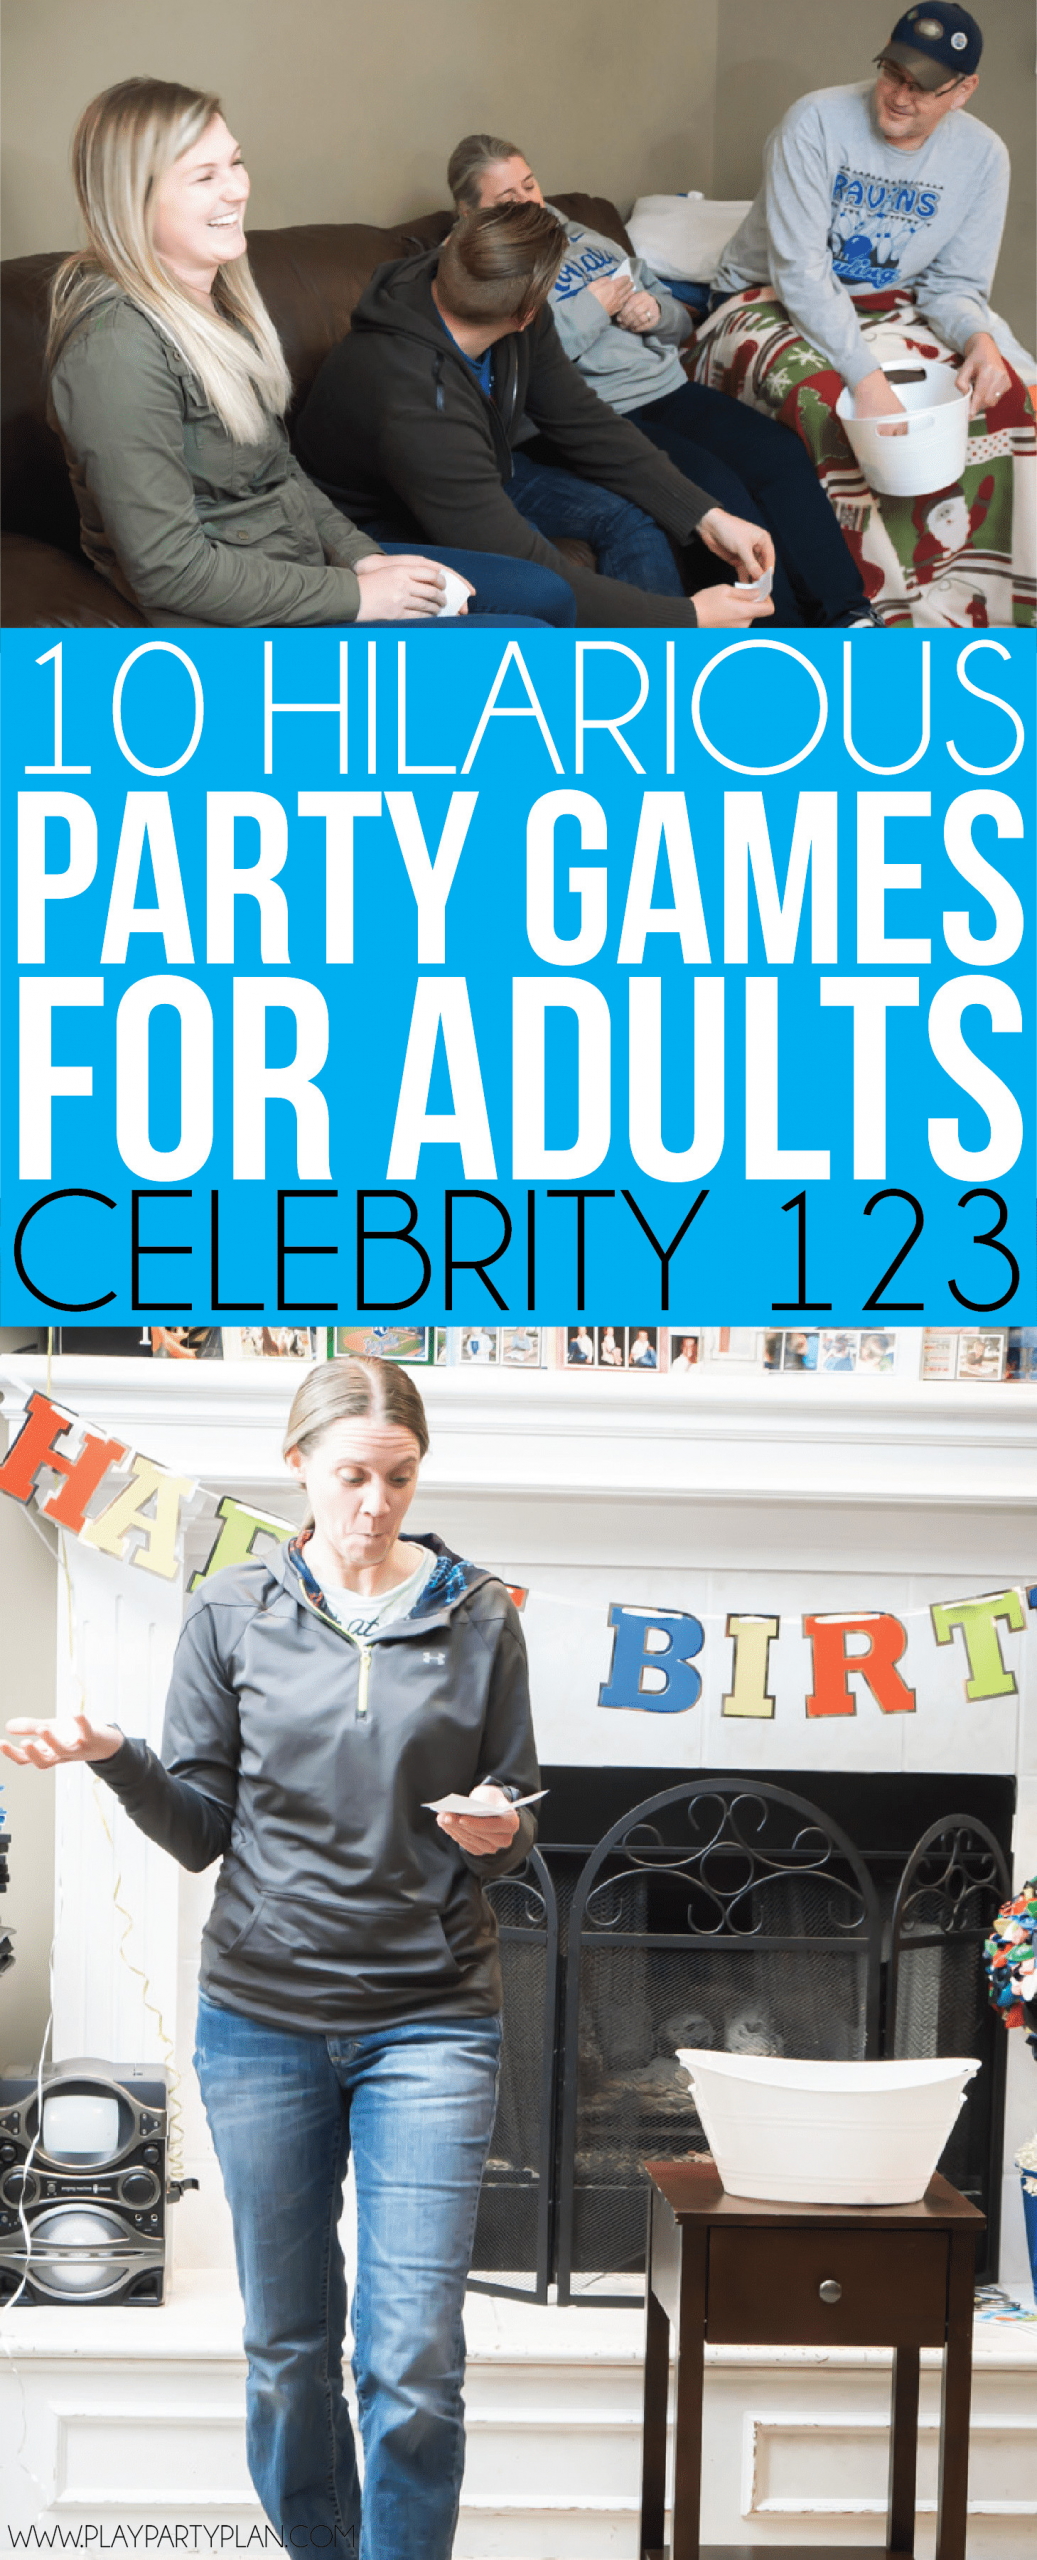 Fun Ideas For Adults
 19 Hilarious Party Games for Adults Play Party Plan